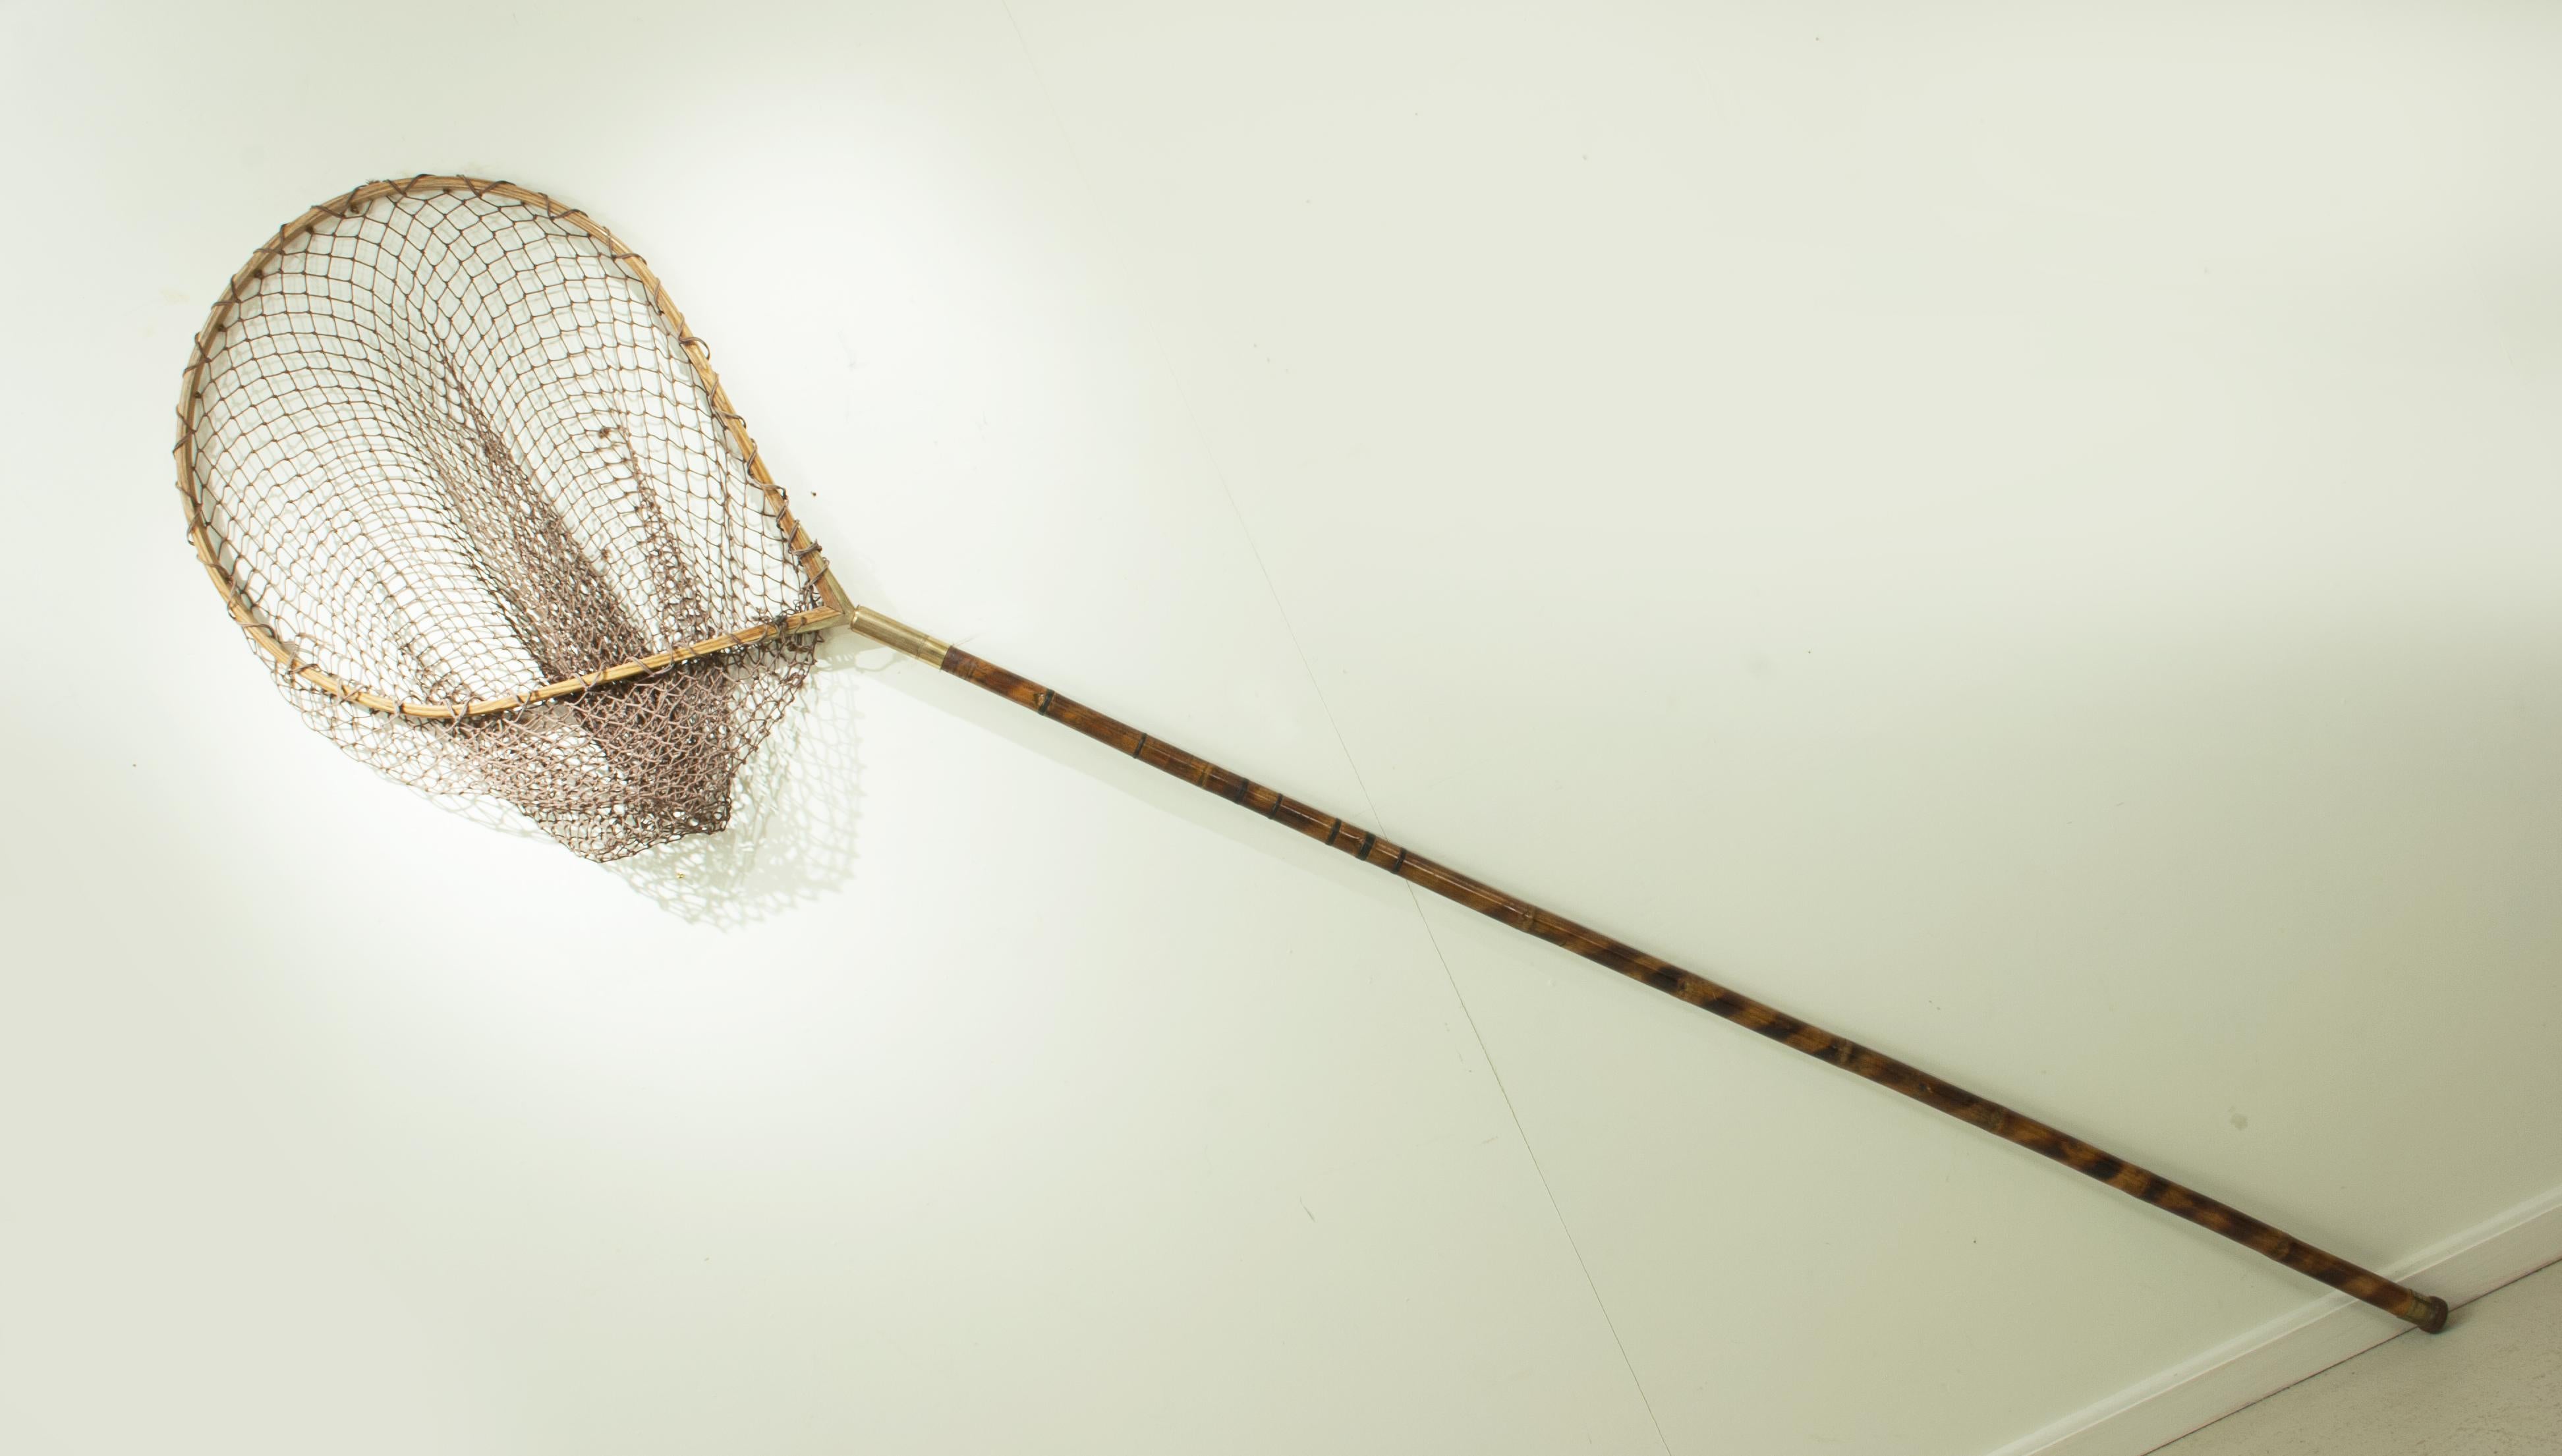 Vintage 8 ft salmon landing net. A good large salmon fishing landing net with a bent ash hoop head. The head of the net is with a good strung net and unscrews from the long bamboo shaft. A very nice net ideal for display purposes.

Collections: